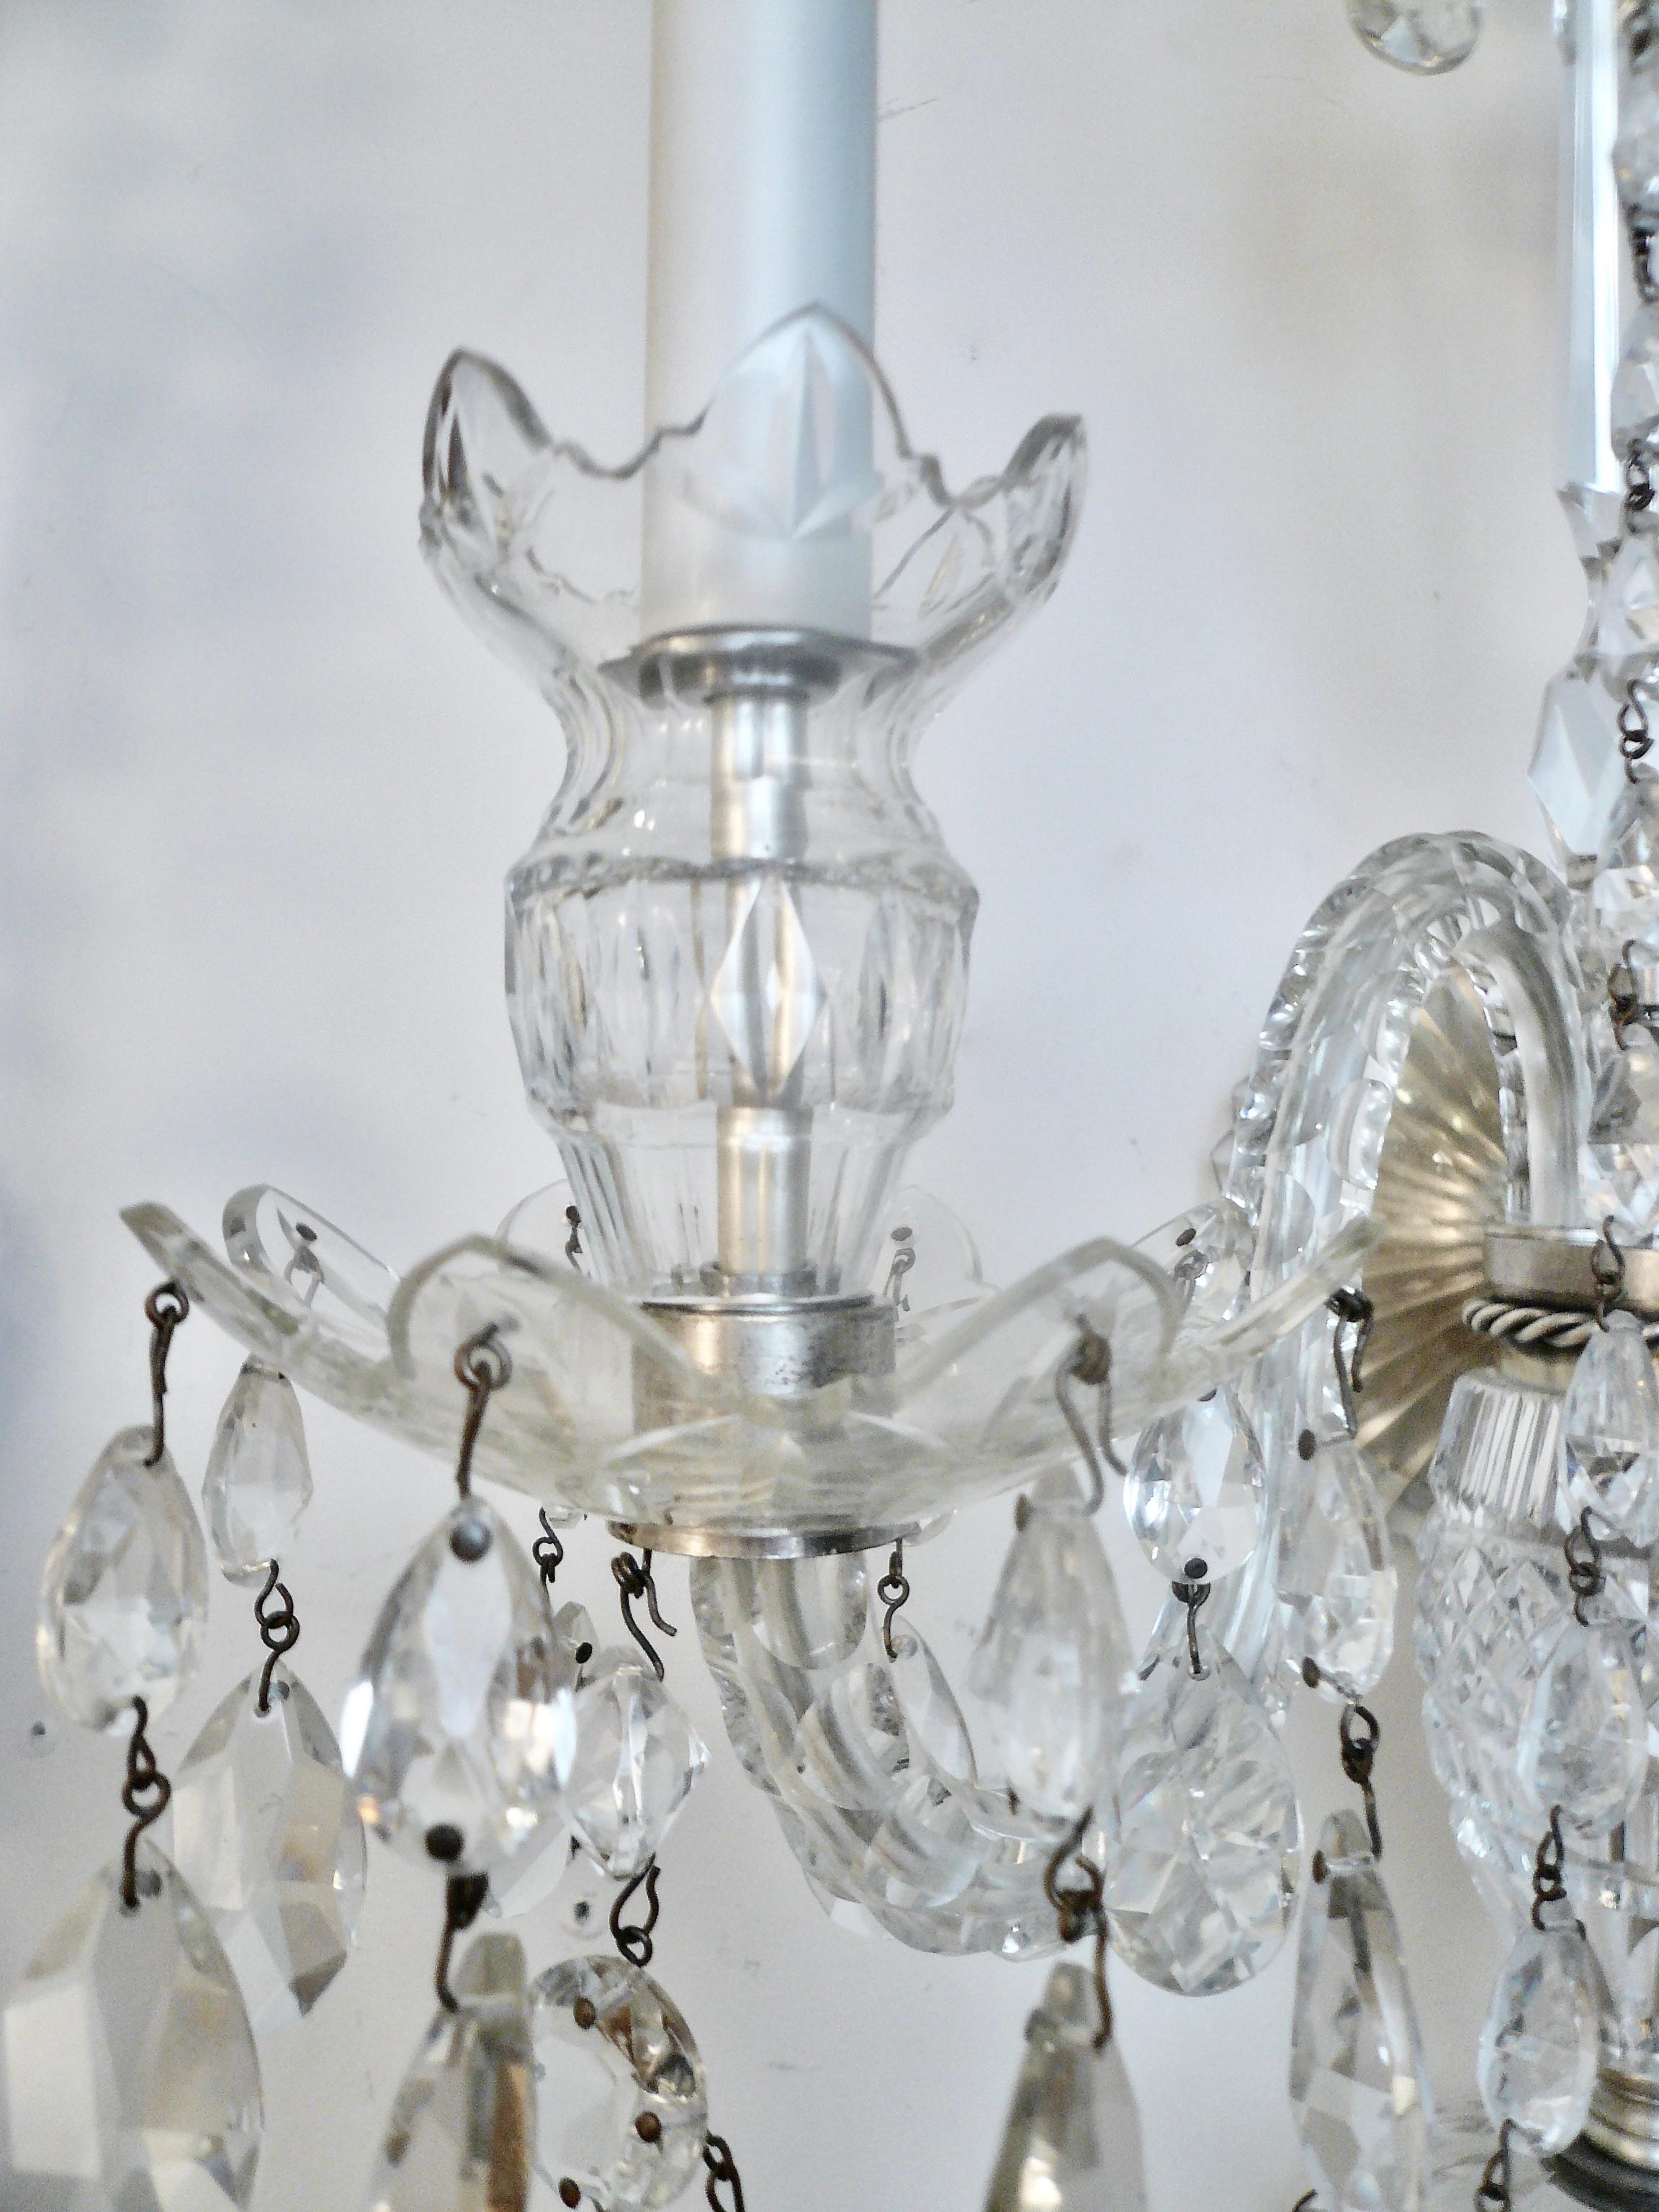 A Grand Scale Pair Cut Crystal Georgian Design Sconces in the Waterford Style In Good Condition For Sale In Pittsburgh, PA